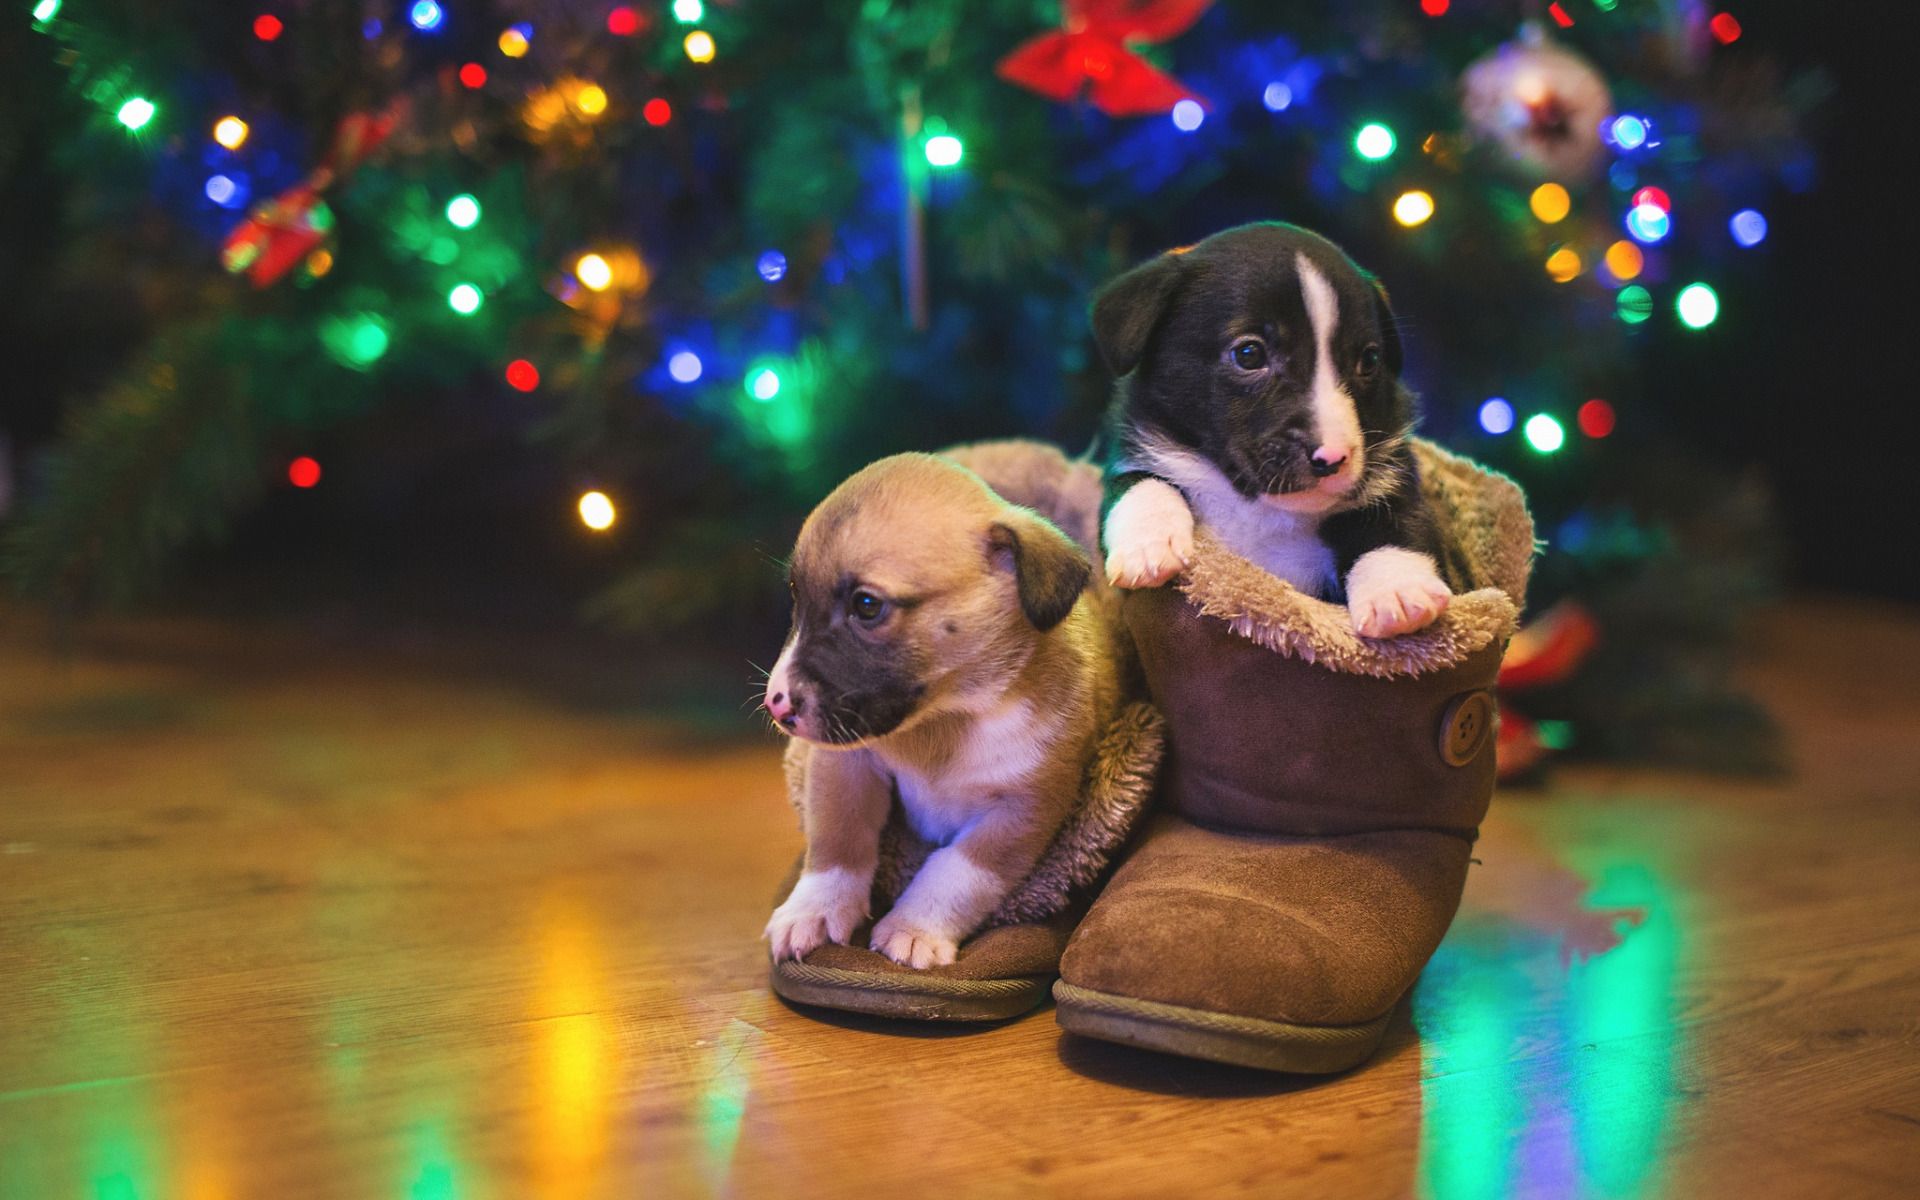 Download wallpaper New Year, puppies, small dogs, pets, Christmas, cute animals for desktop with resolution 1920x1200. High Quality HD picture wallpaper